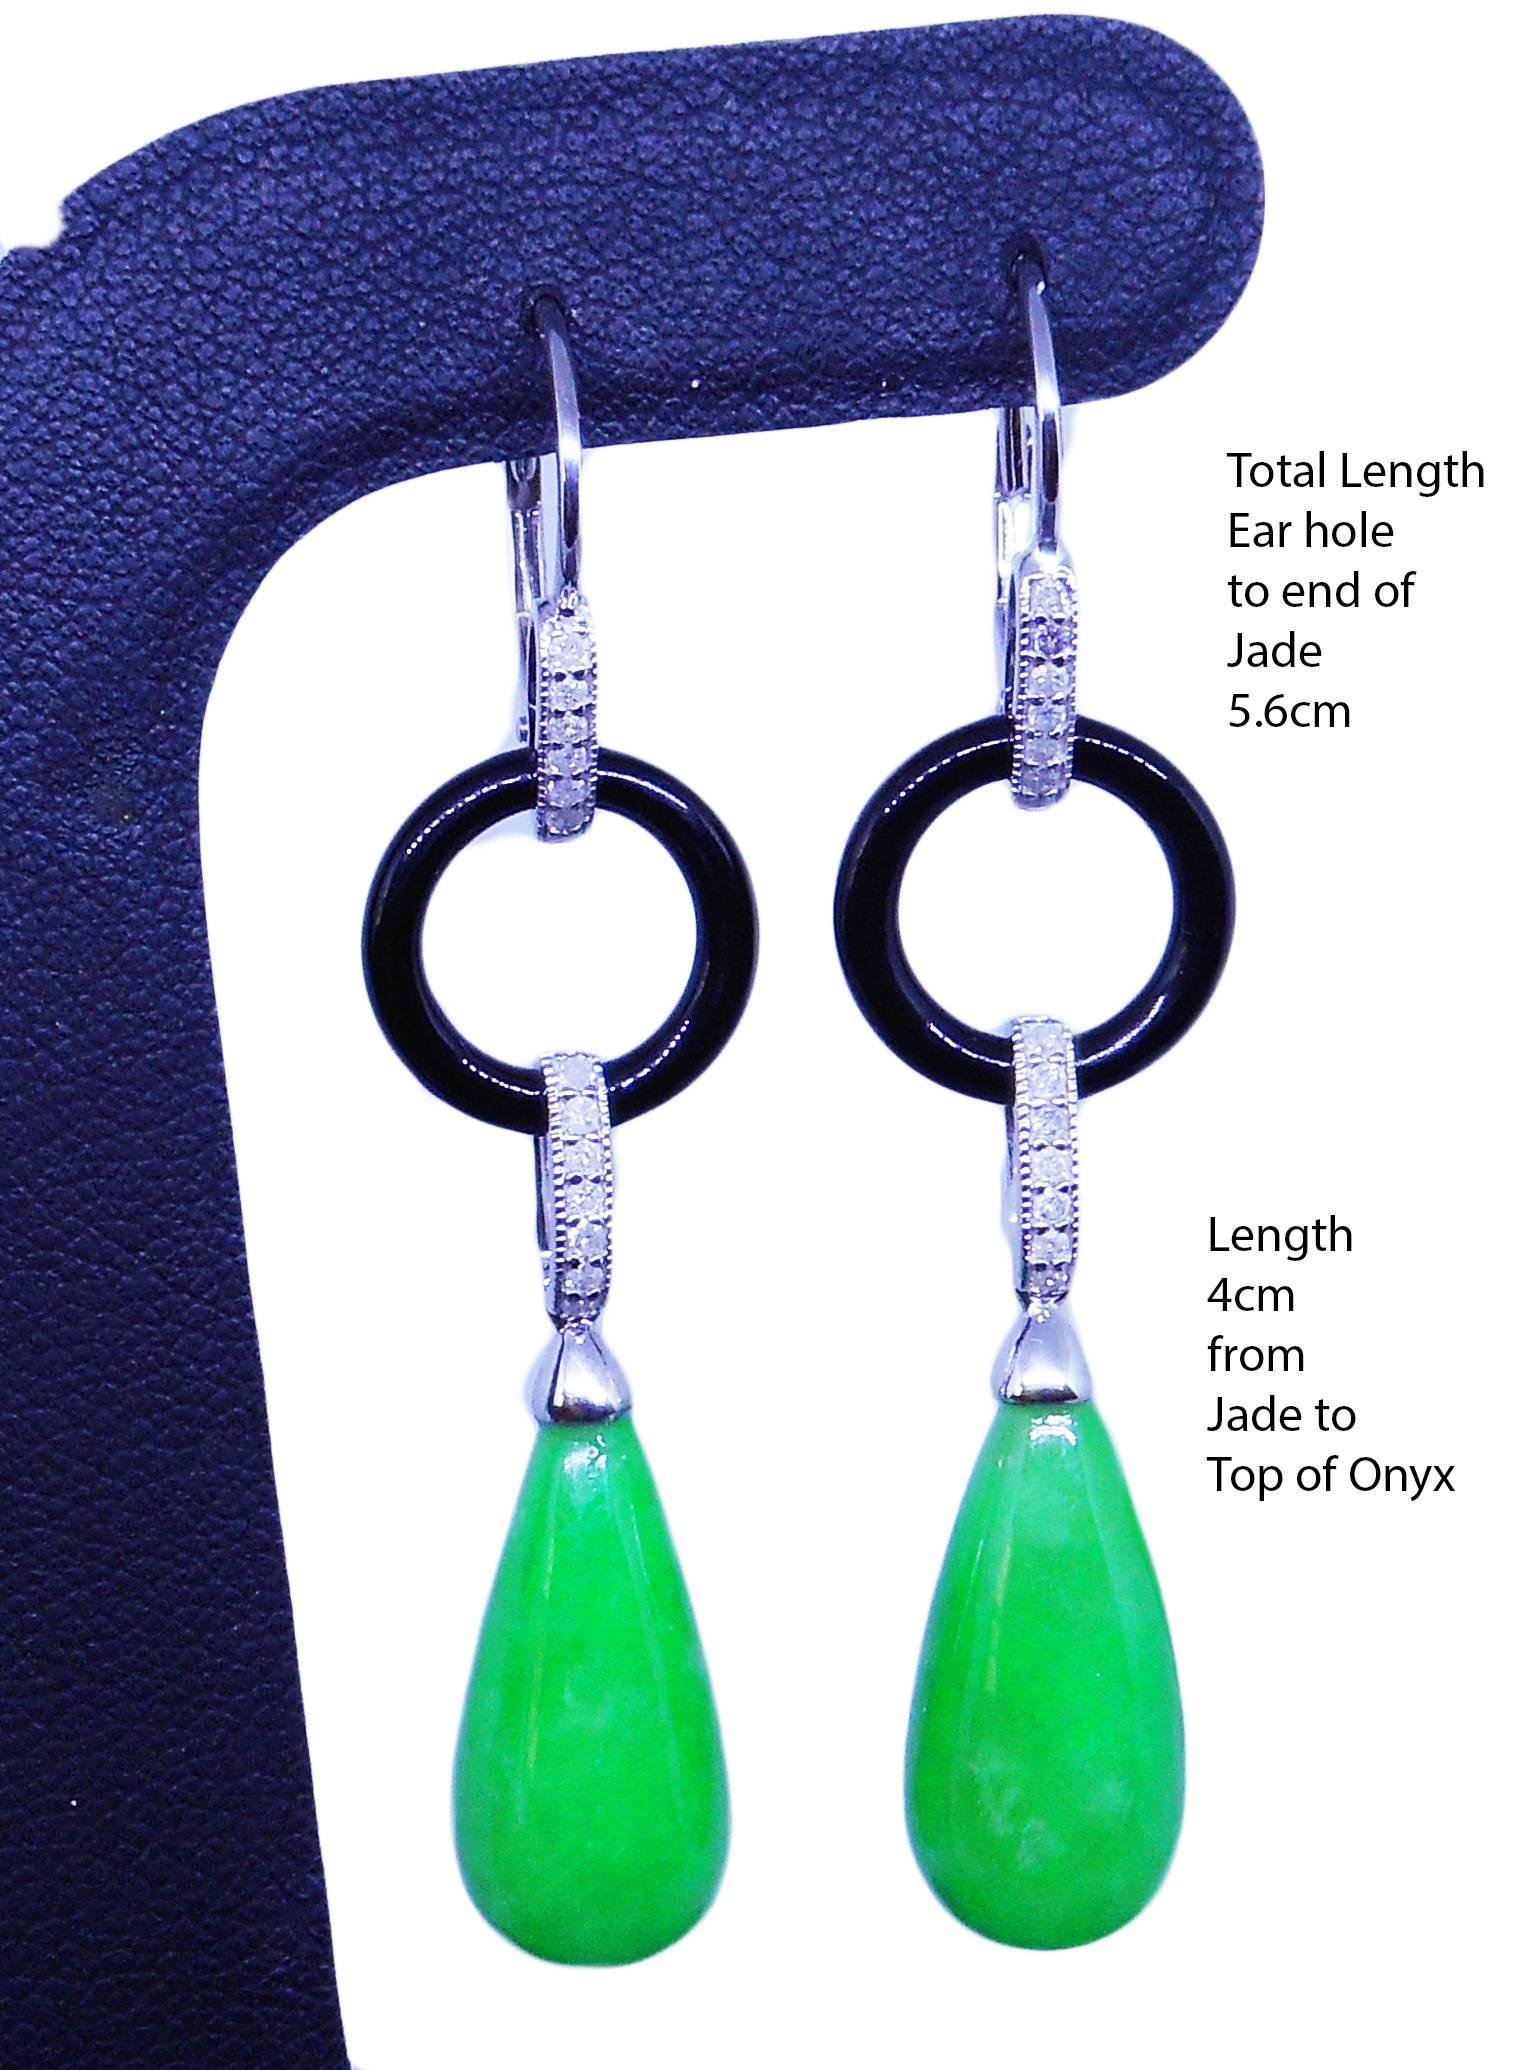 A PAIR OF  JADE AND DIAMOND DROP EARRINGS by Emily Sam Collection 

2 Jade 28.78 Carat
2 Onyx 3.10 Carat
28 Diamonds totalling 0.23 Carat
Free express delivery with postage from Sydney to New York approx. 3-4 days
Free Insurance
by Emily Sam